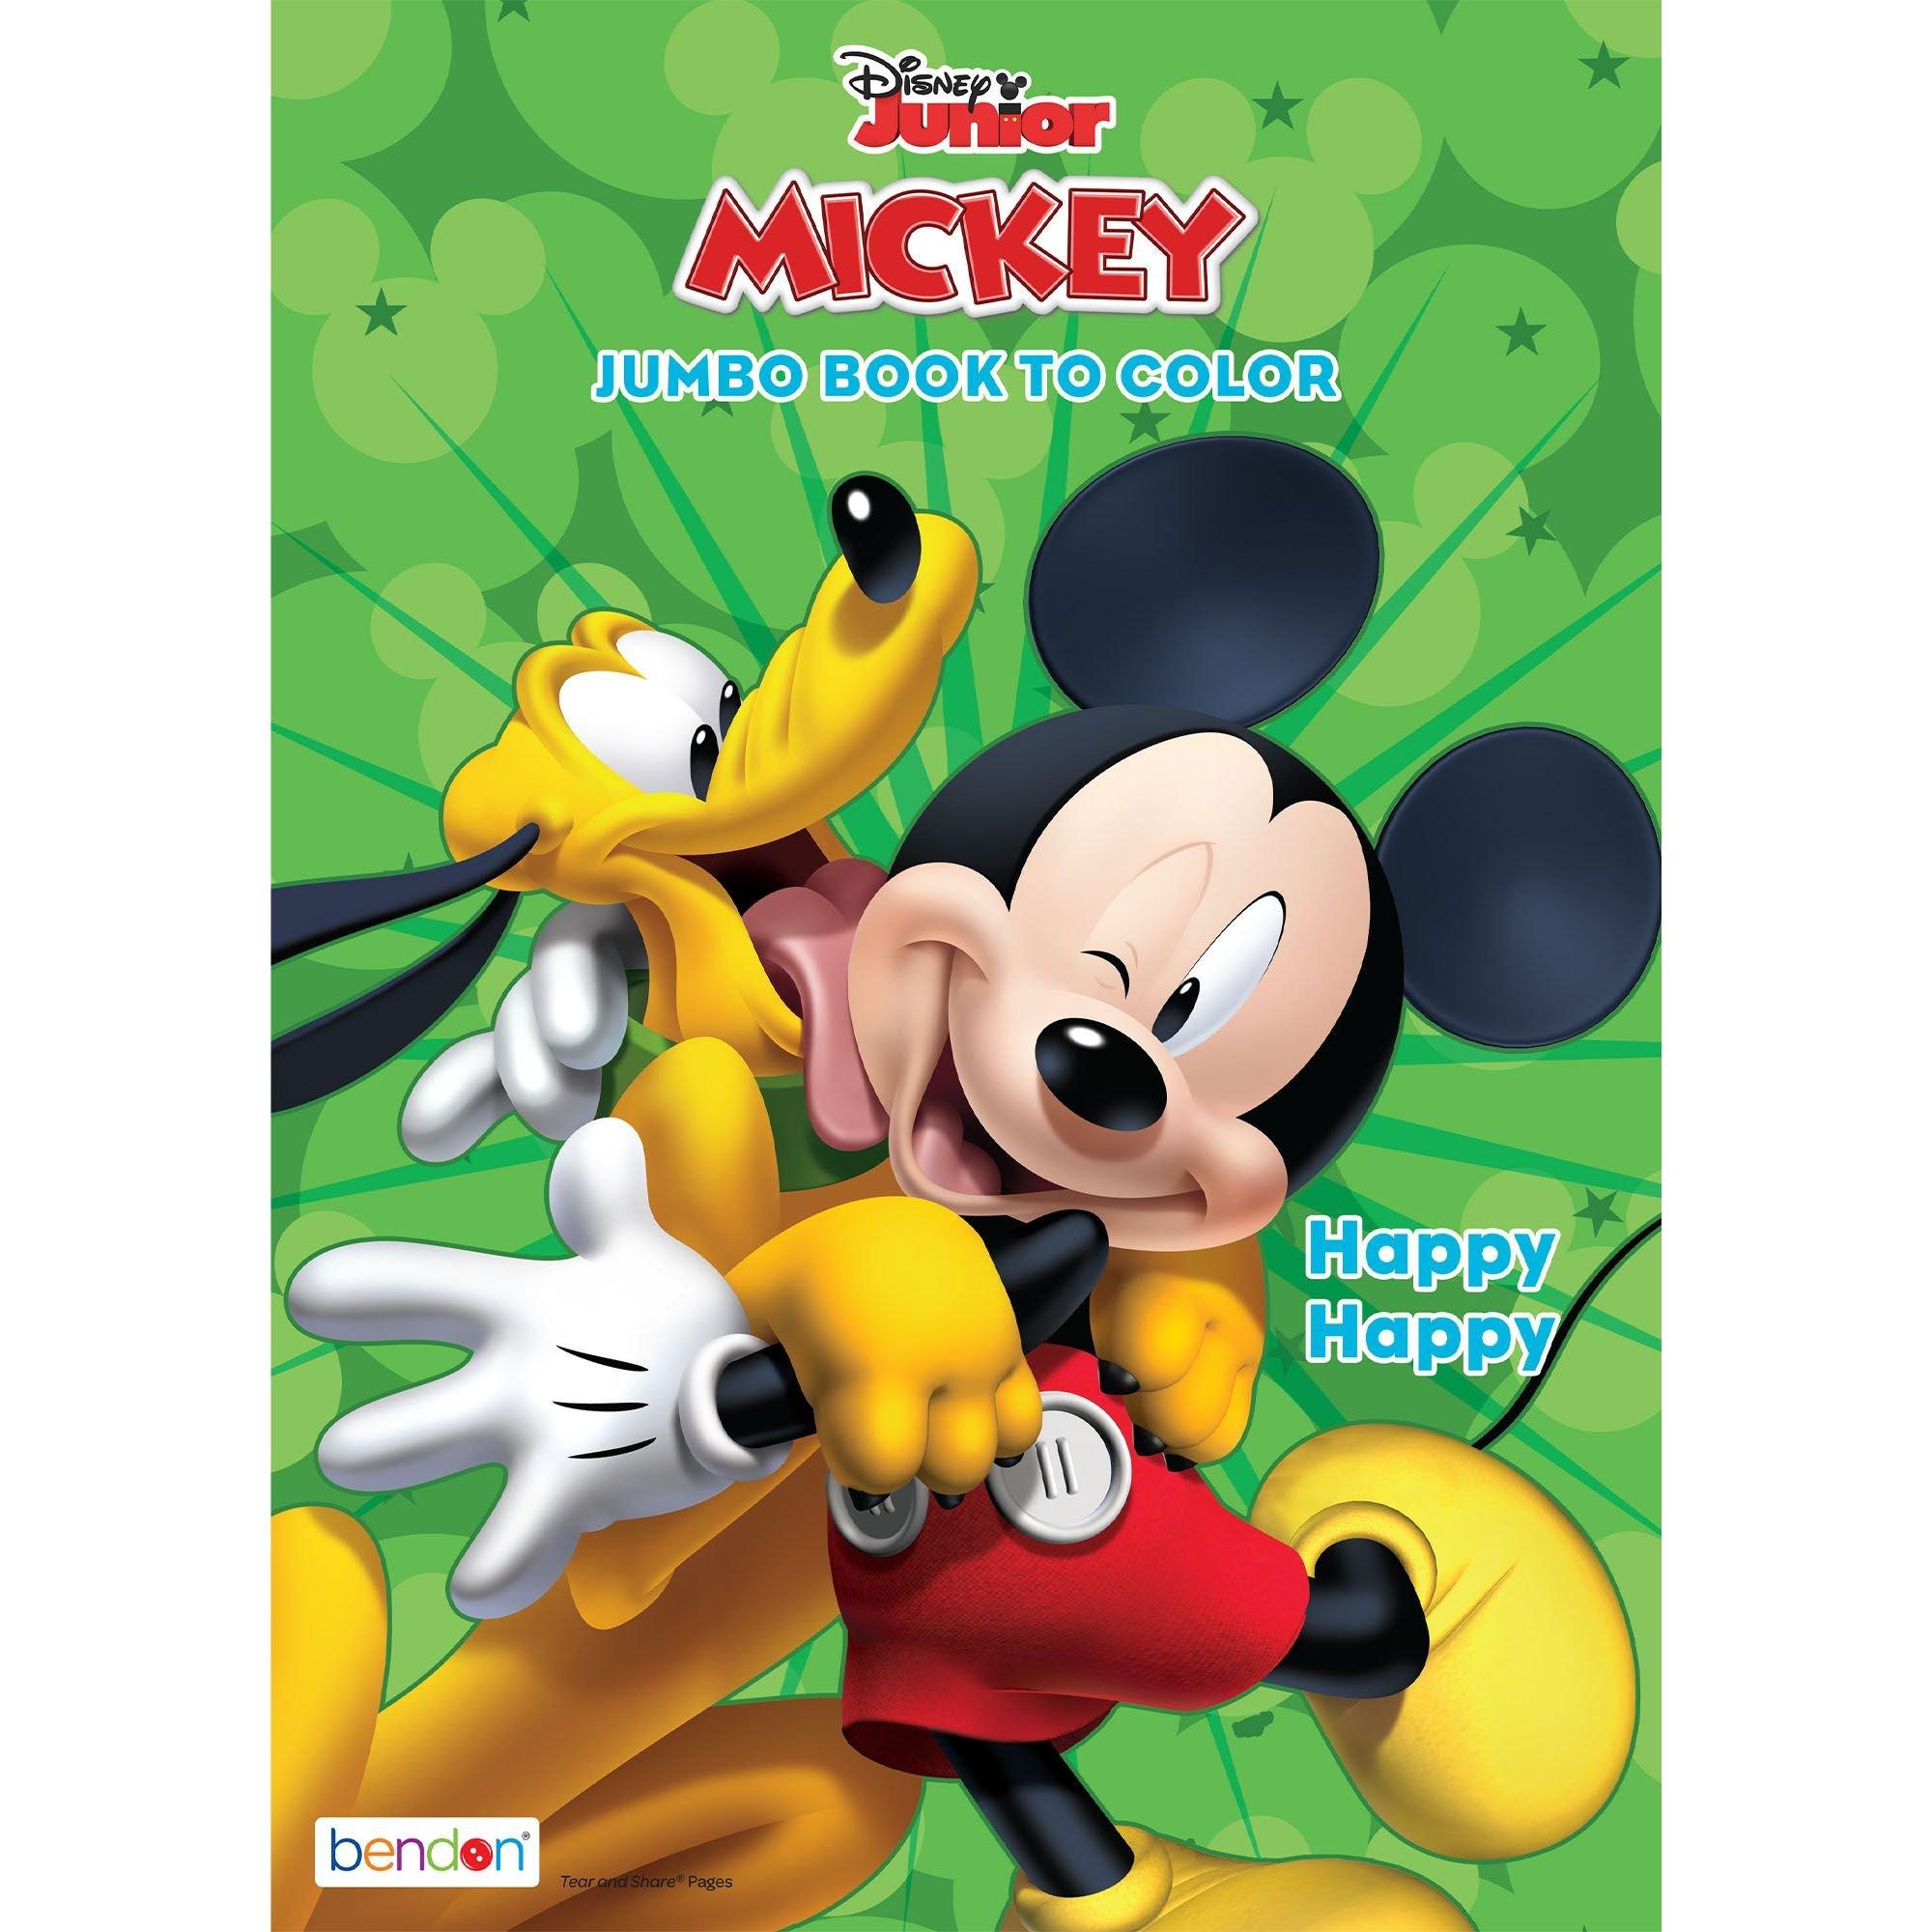 Disney Coloring Books And Supplies For Adults Gift Guide